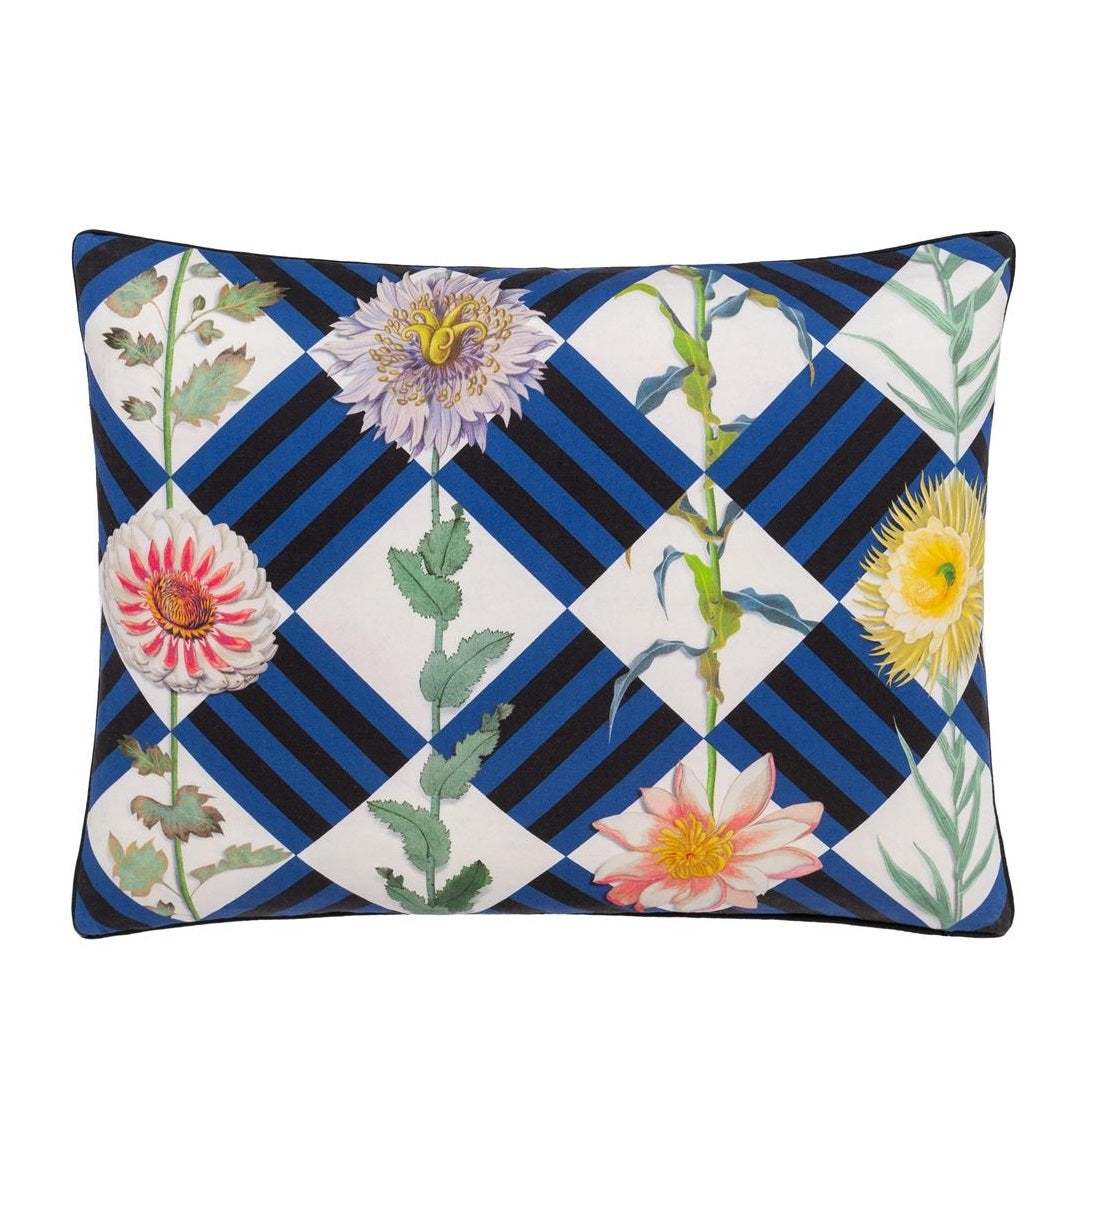 Double-sided pillow FLOWER'S GAME BOURGEON cotton satin